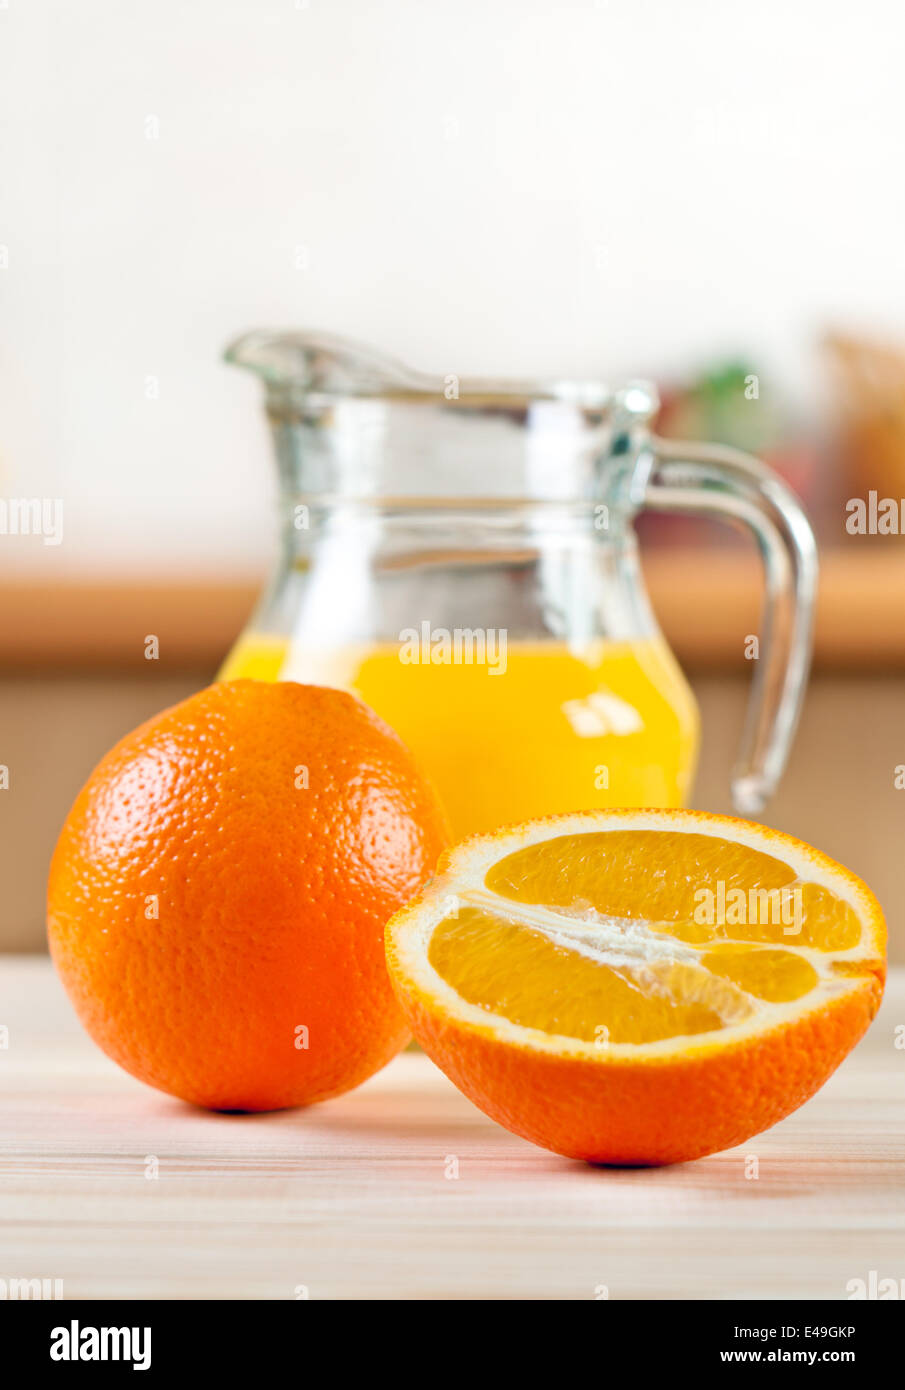 Oranges with a jug of juice Stock Photo